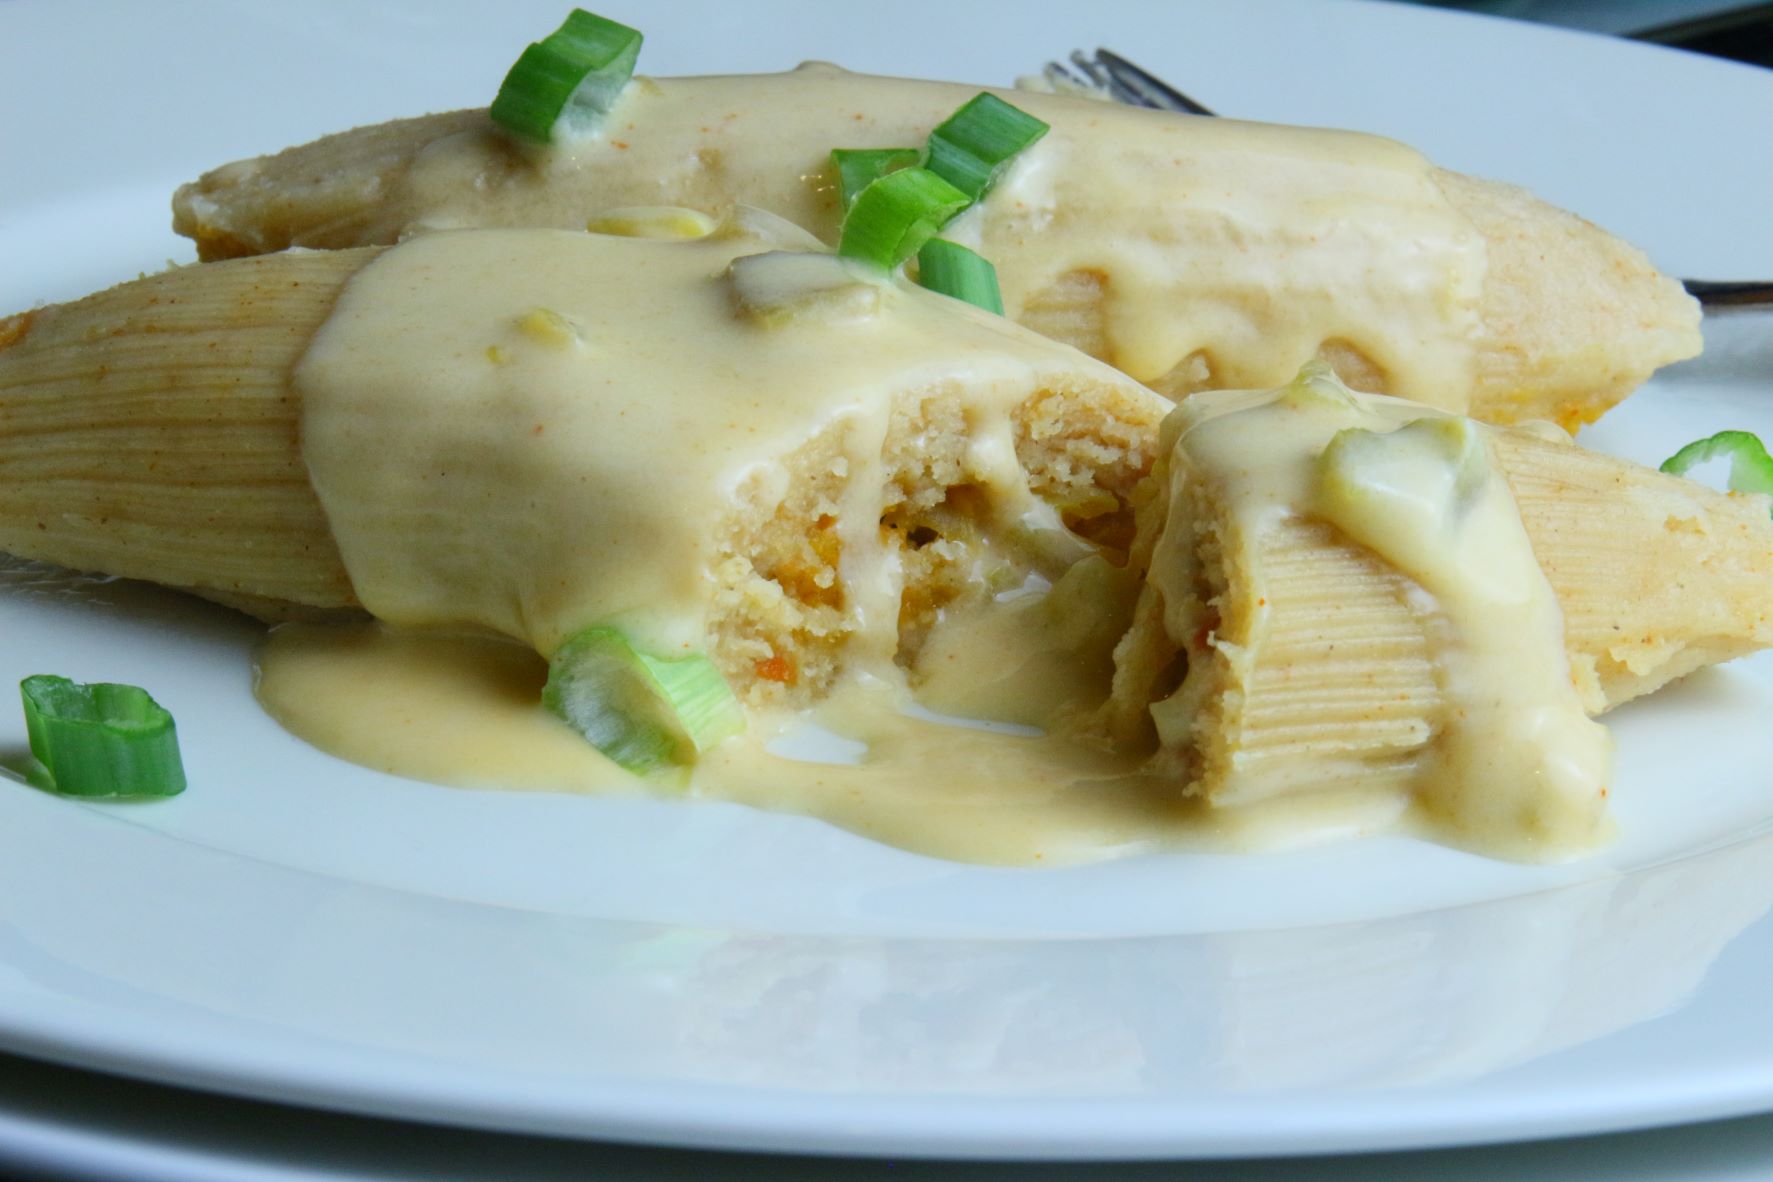 Butternut Squash and Mushroom Tamales with Queso